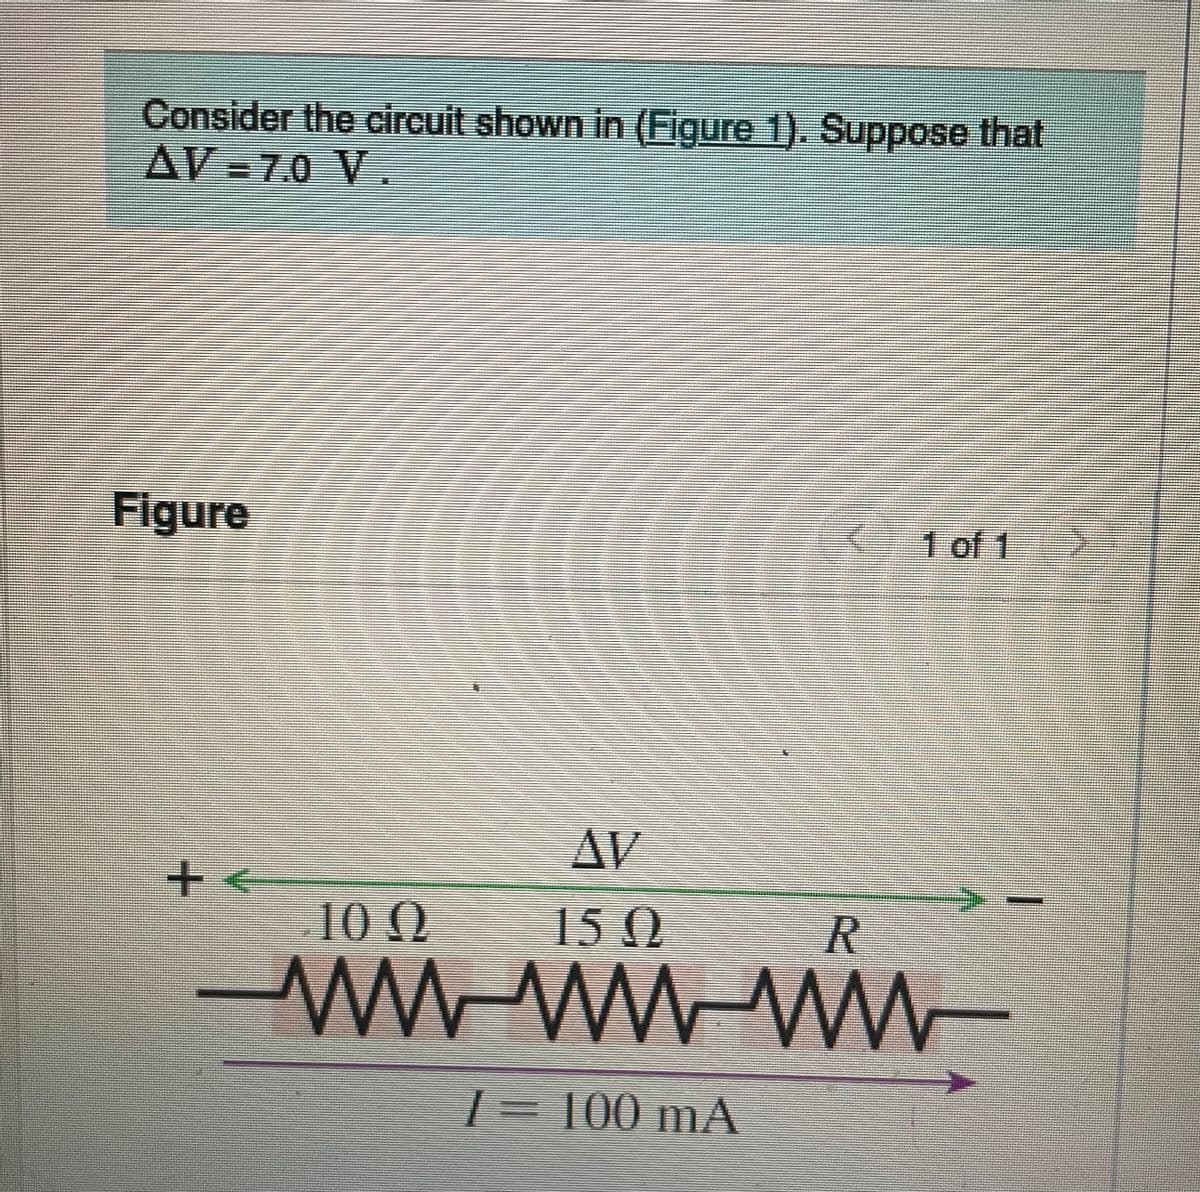 Consider the circuit shown in (Figure 1). Suppose that
AV-70 V.
Figure
+€
100
W
150
M
R
W W
I= 100 mA
1 of 1